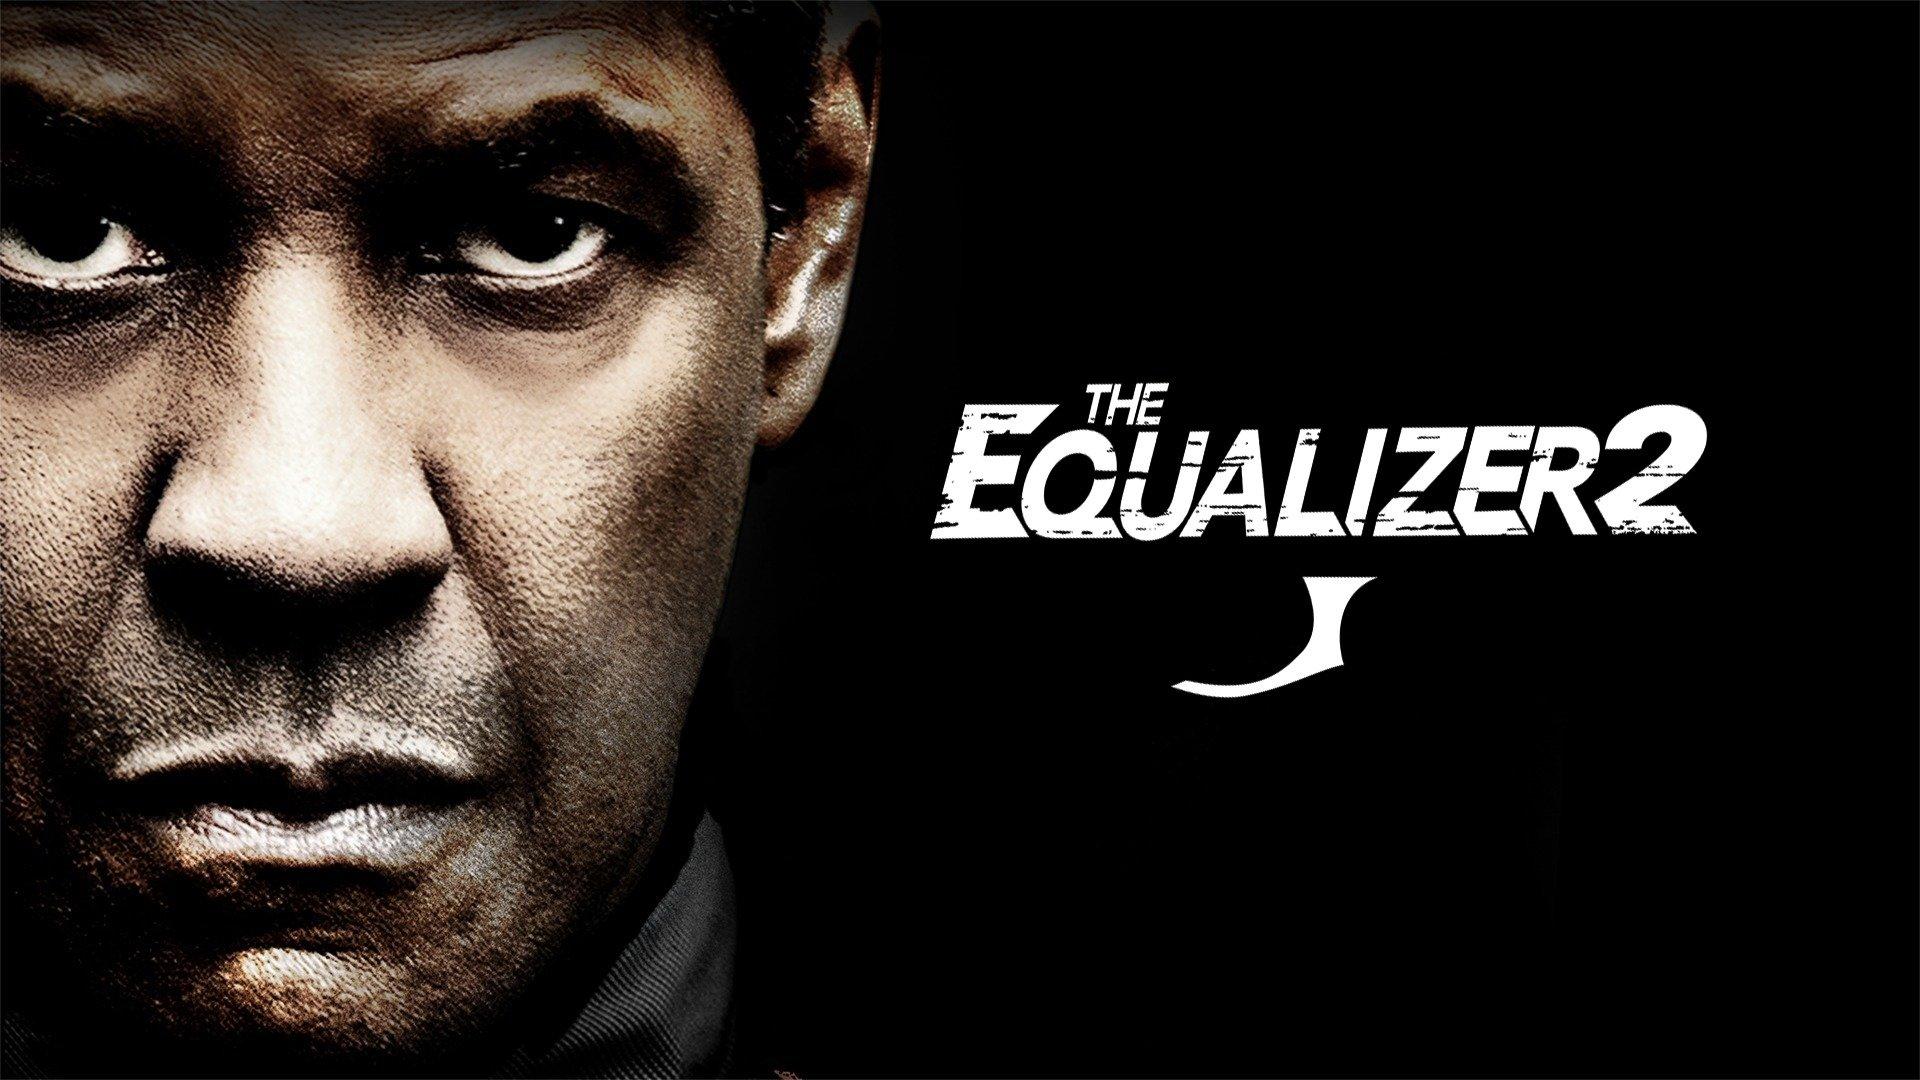 The equalizer 2 traductor